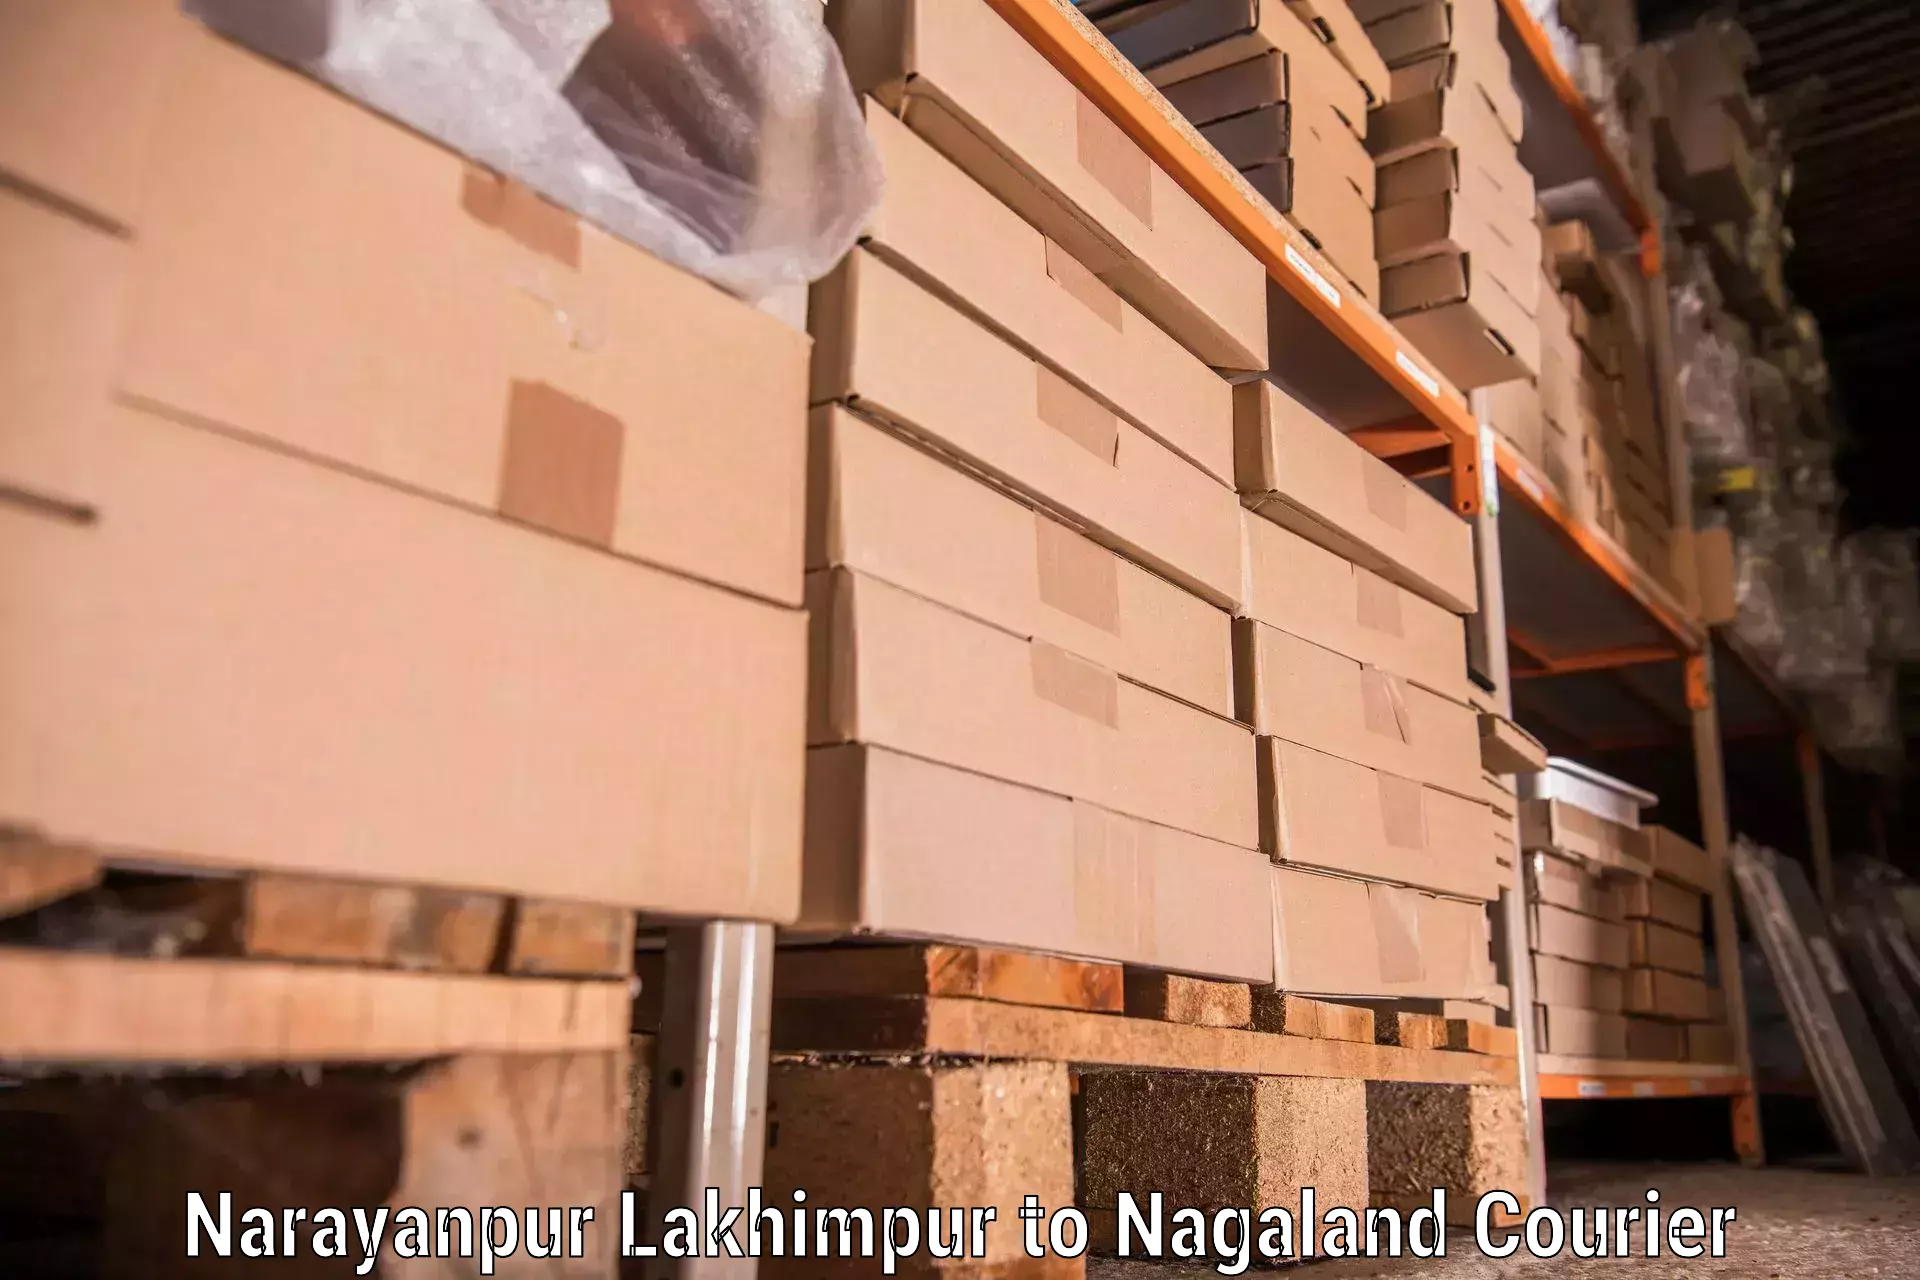 Quality relocation assistance in Narayanpur Lakhimpur to Nagaland